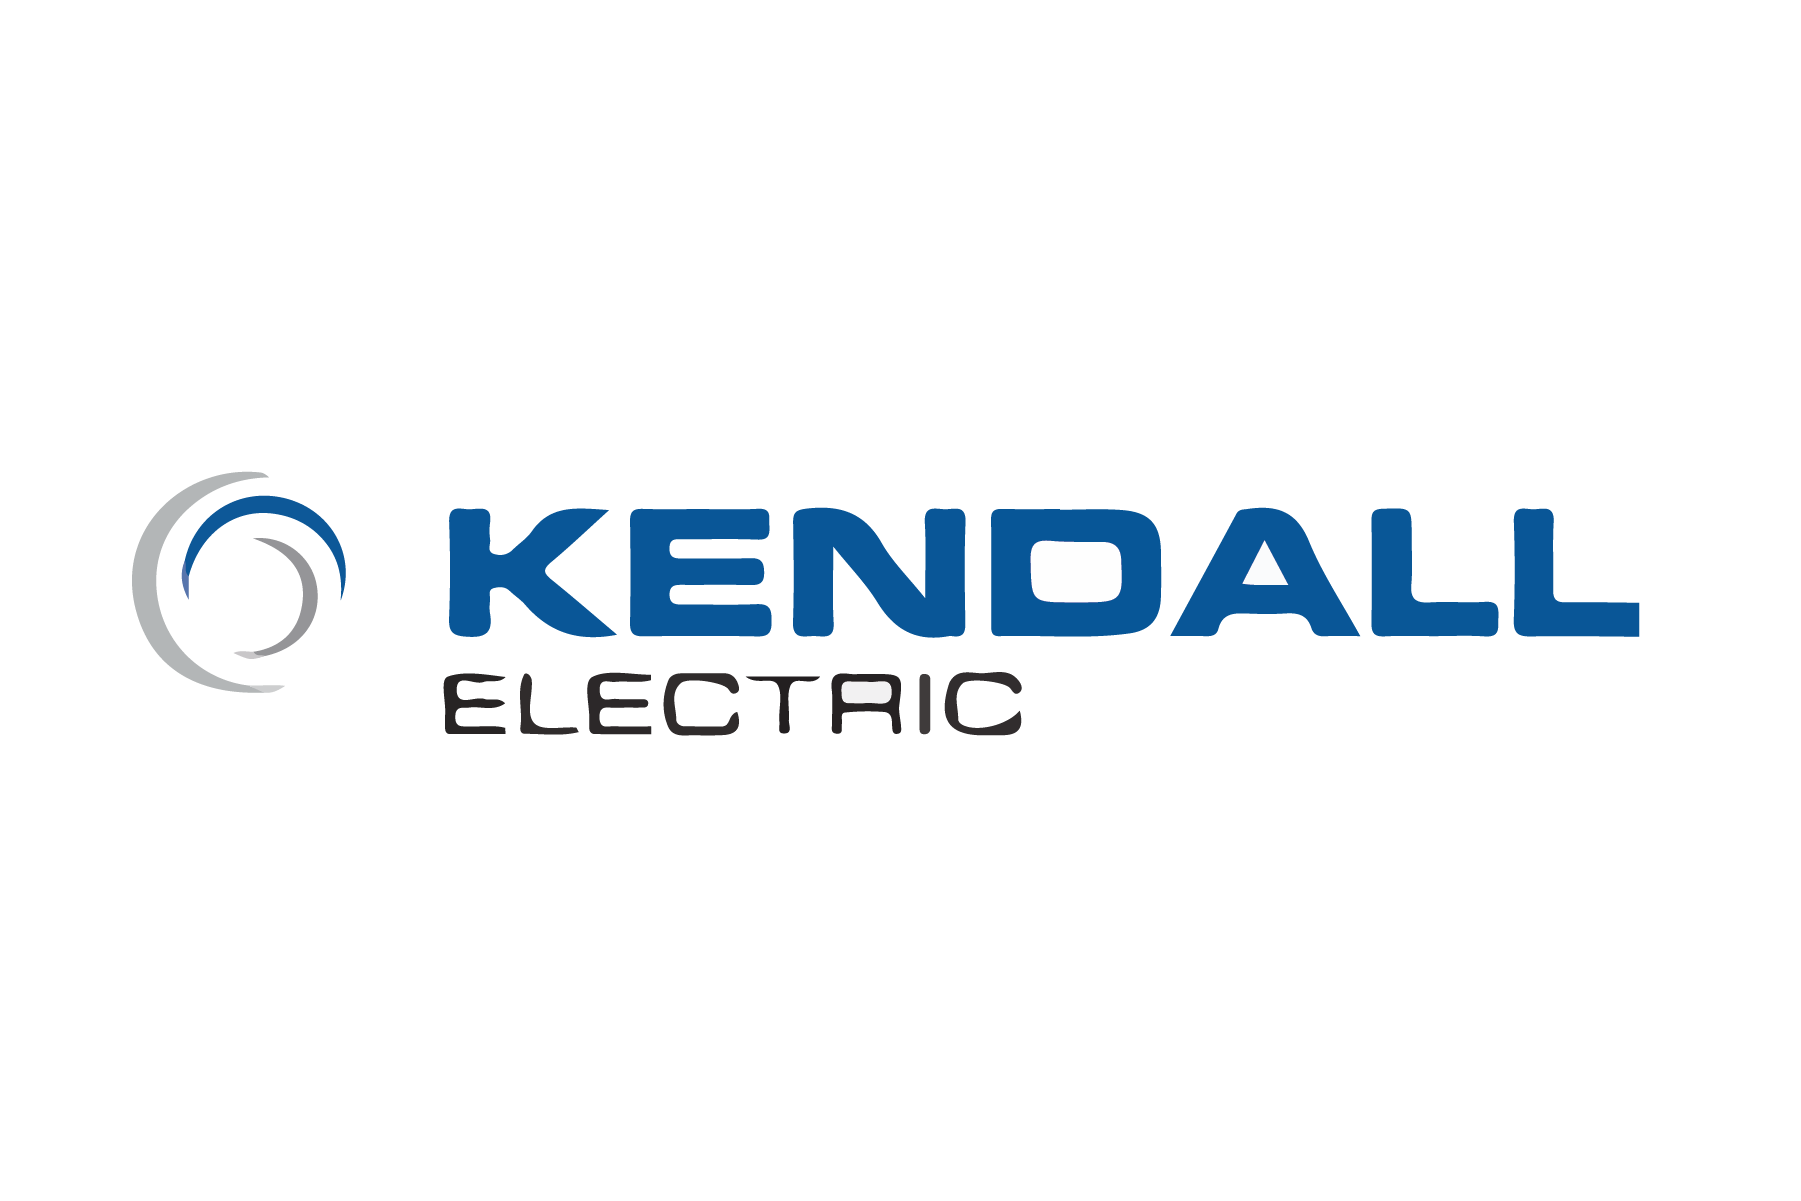 Kendall Electric